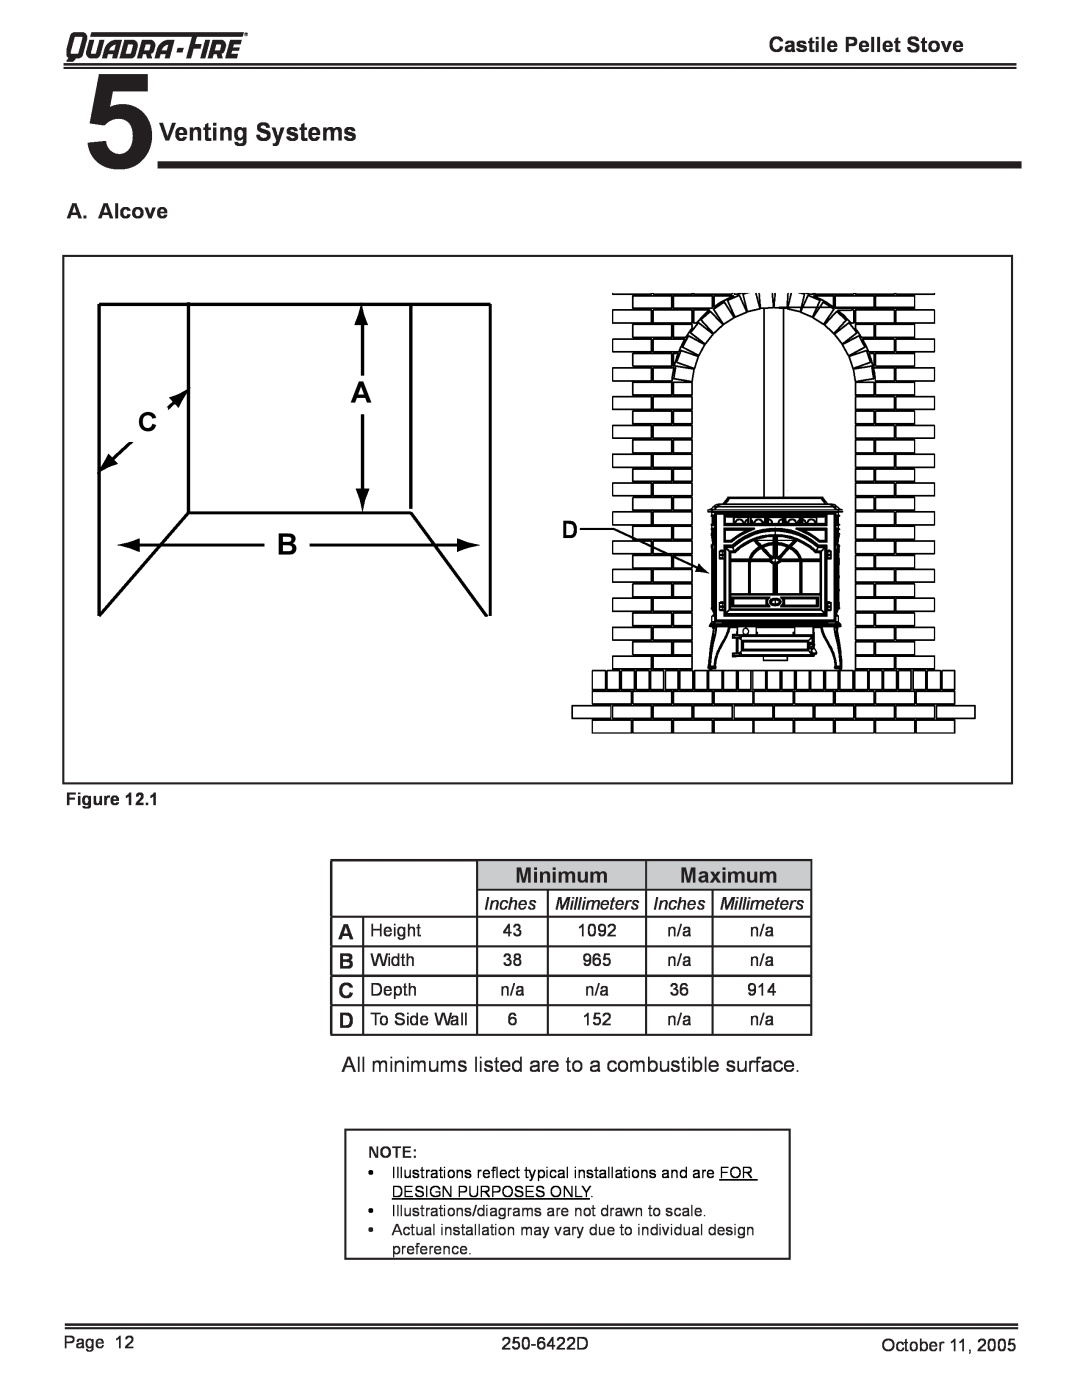 Quadra-Fire CASTILE-MBK Venting Systems, A. Alcove, Minimum, Maximum, All minimums listed are to a combustible surface 